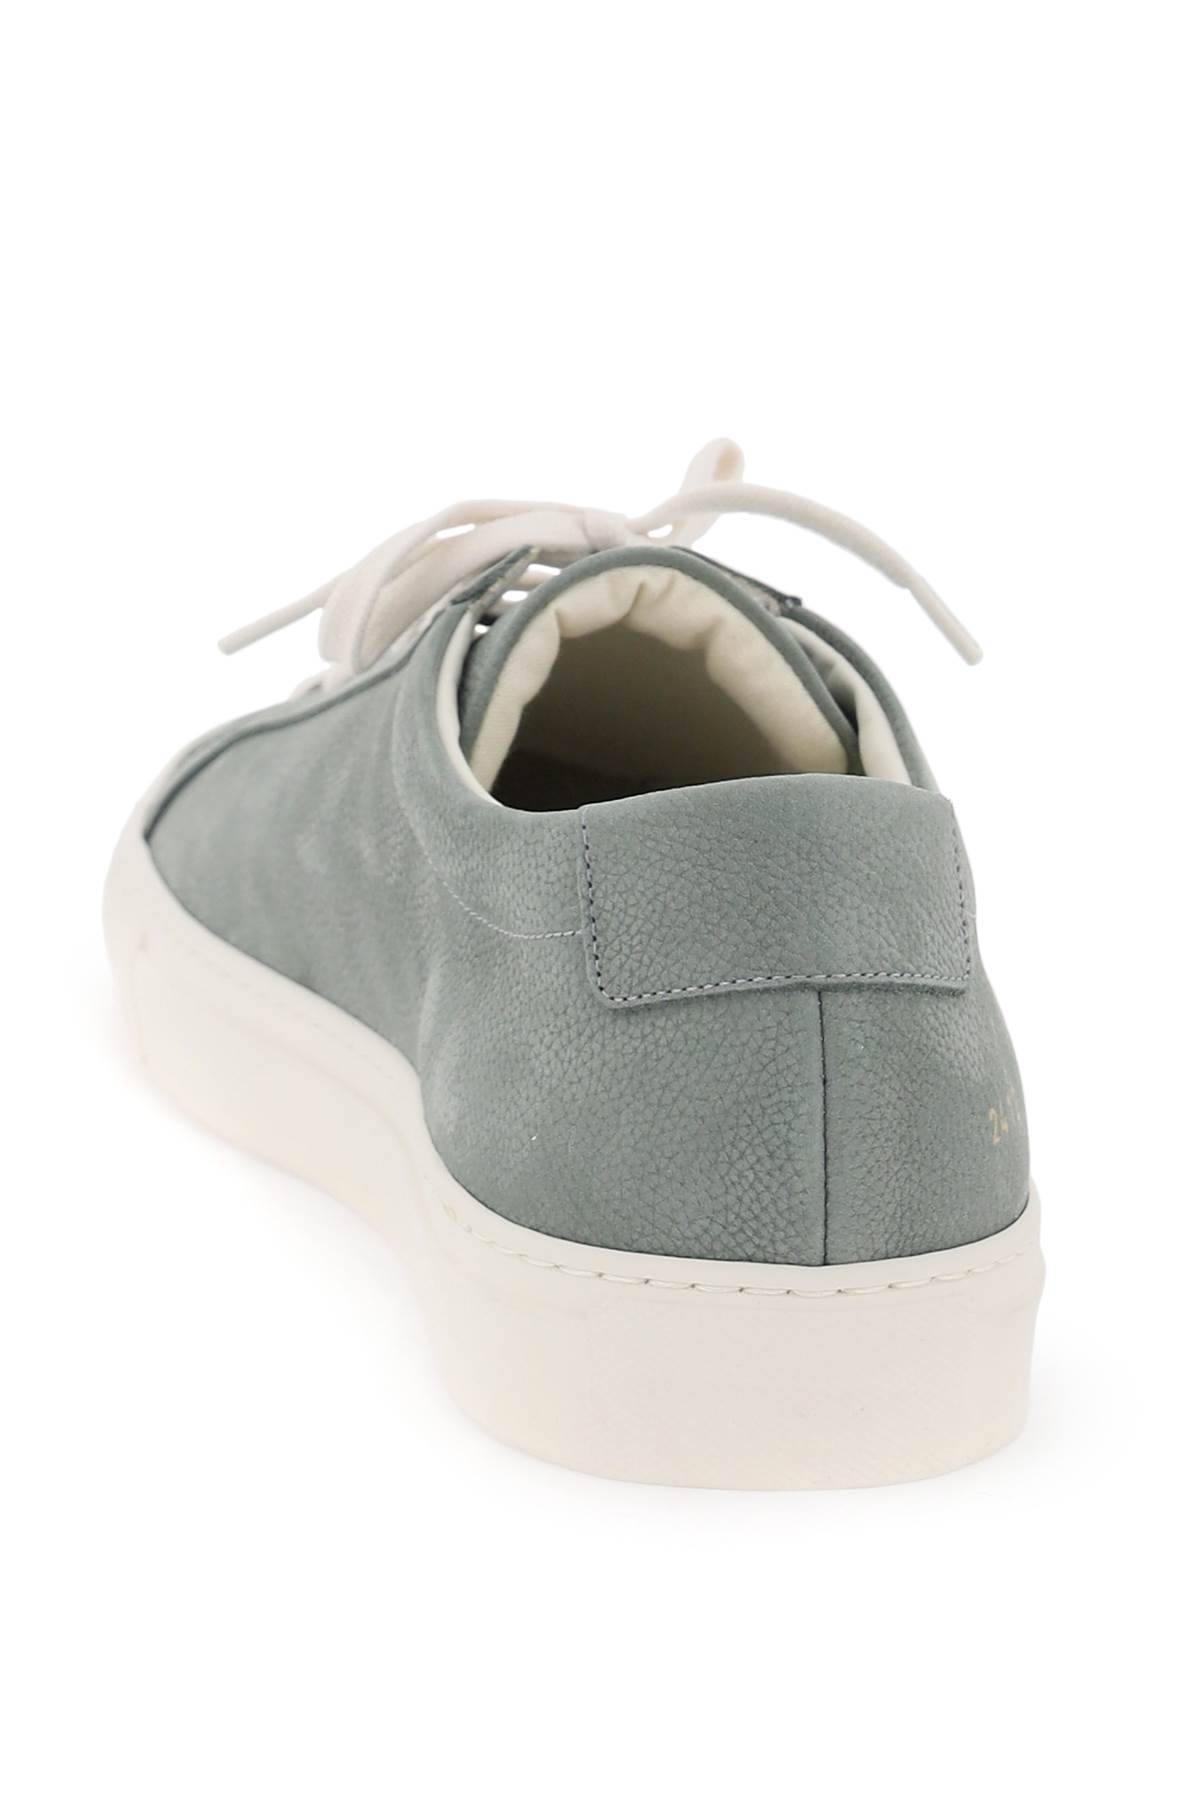 Shop Common Projects Original Achilles Leather Sneakers In Green